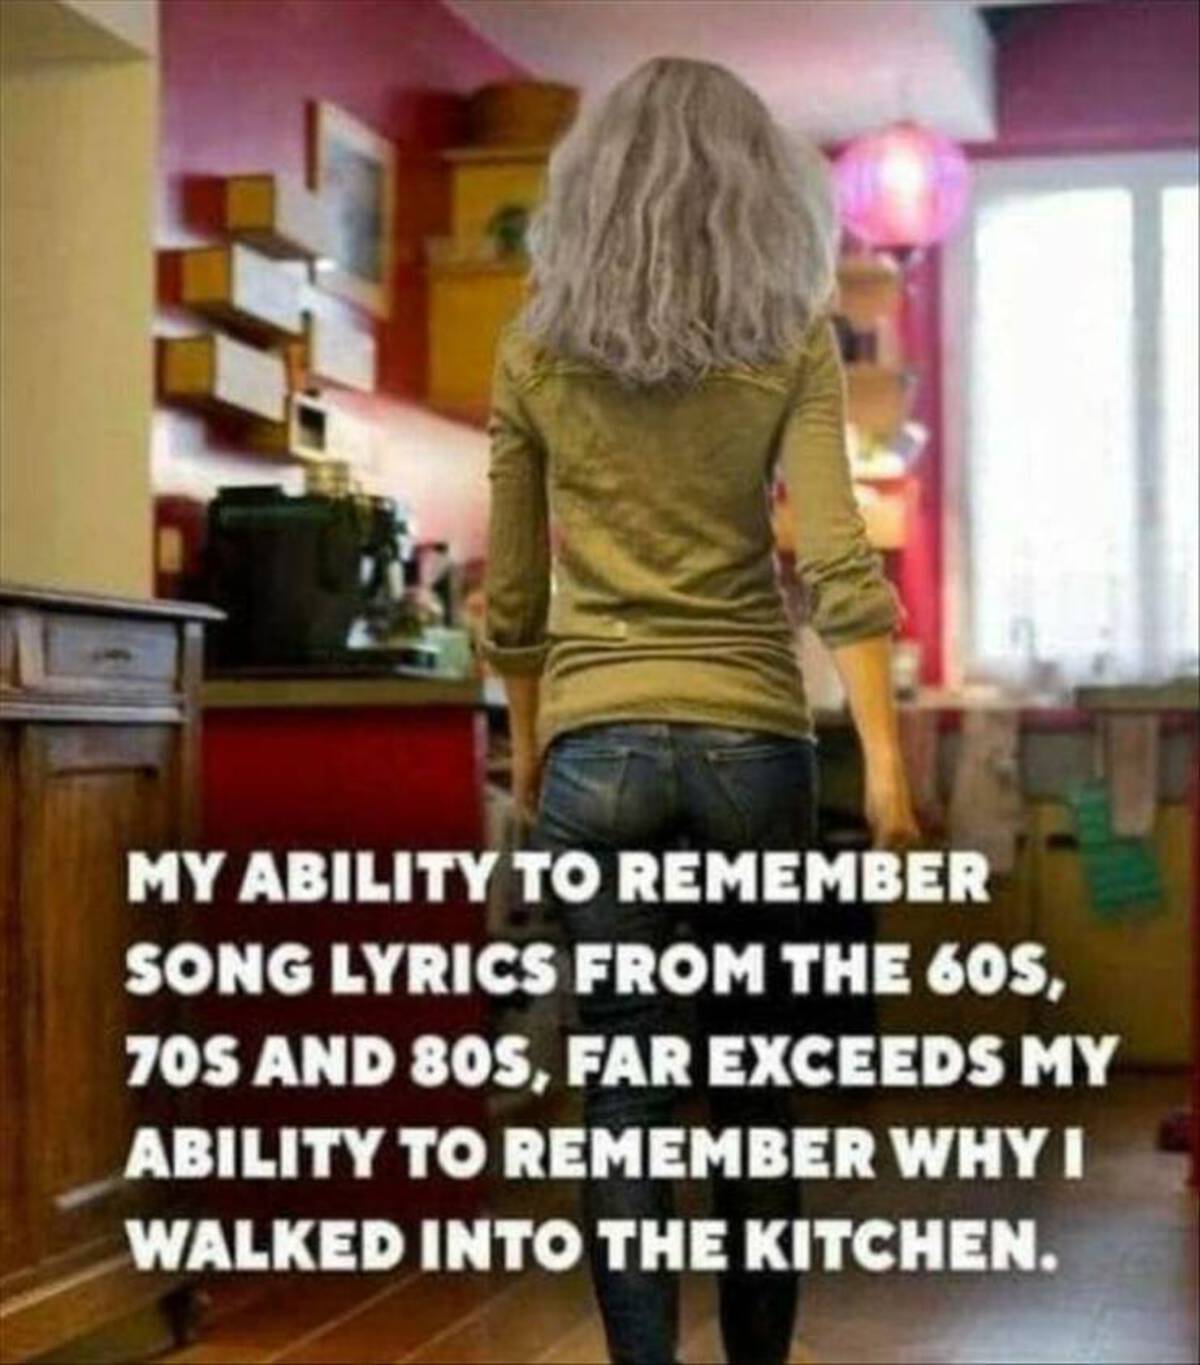 girl - My Ability To Remember Song Lyrics From The 60S, 70S And 80S, Far Exceeds My Ability To Remember Why I Walked Into The Kitchen.